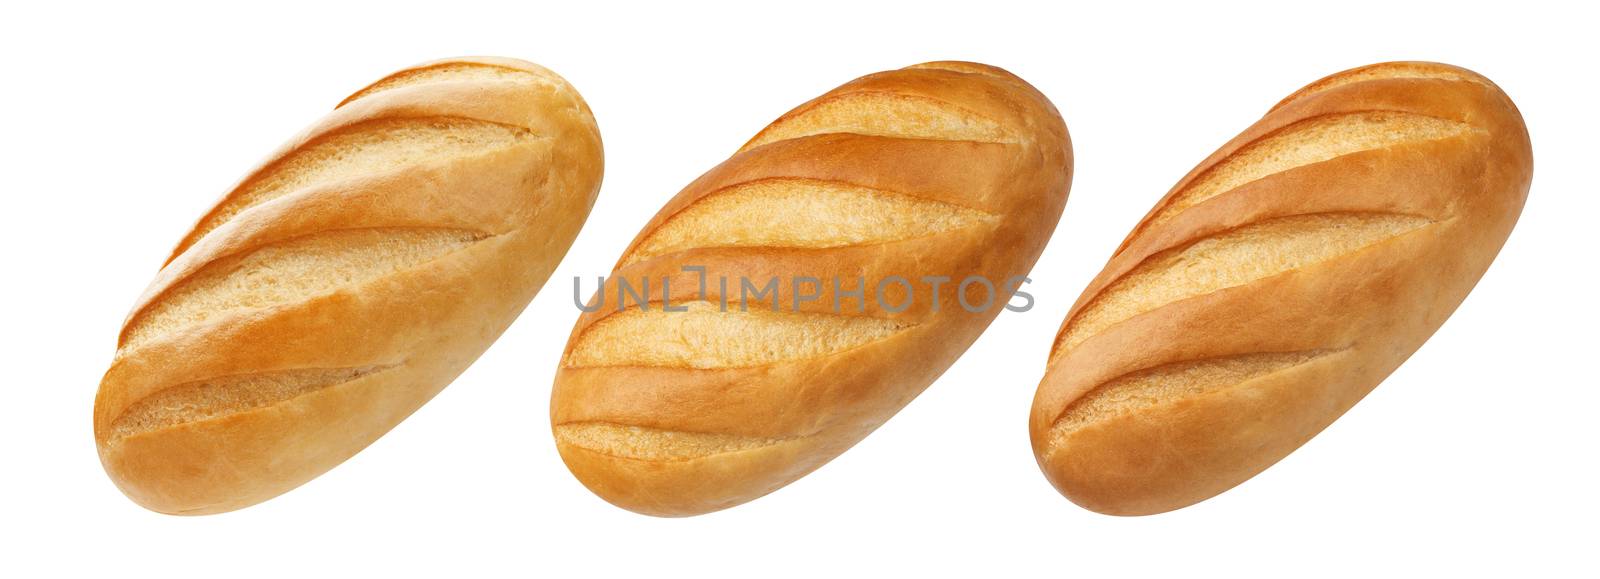 White bread isolated on white background with clipping path. Collection